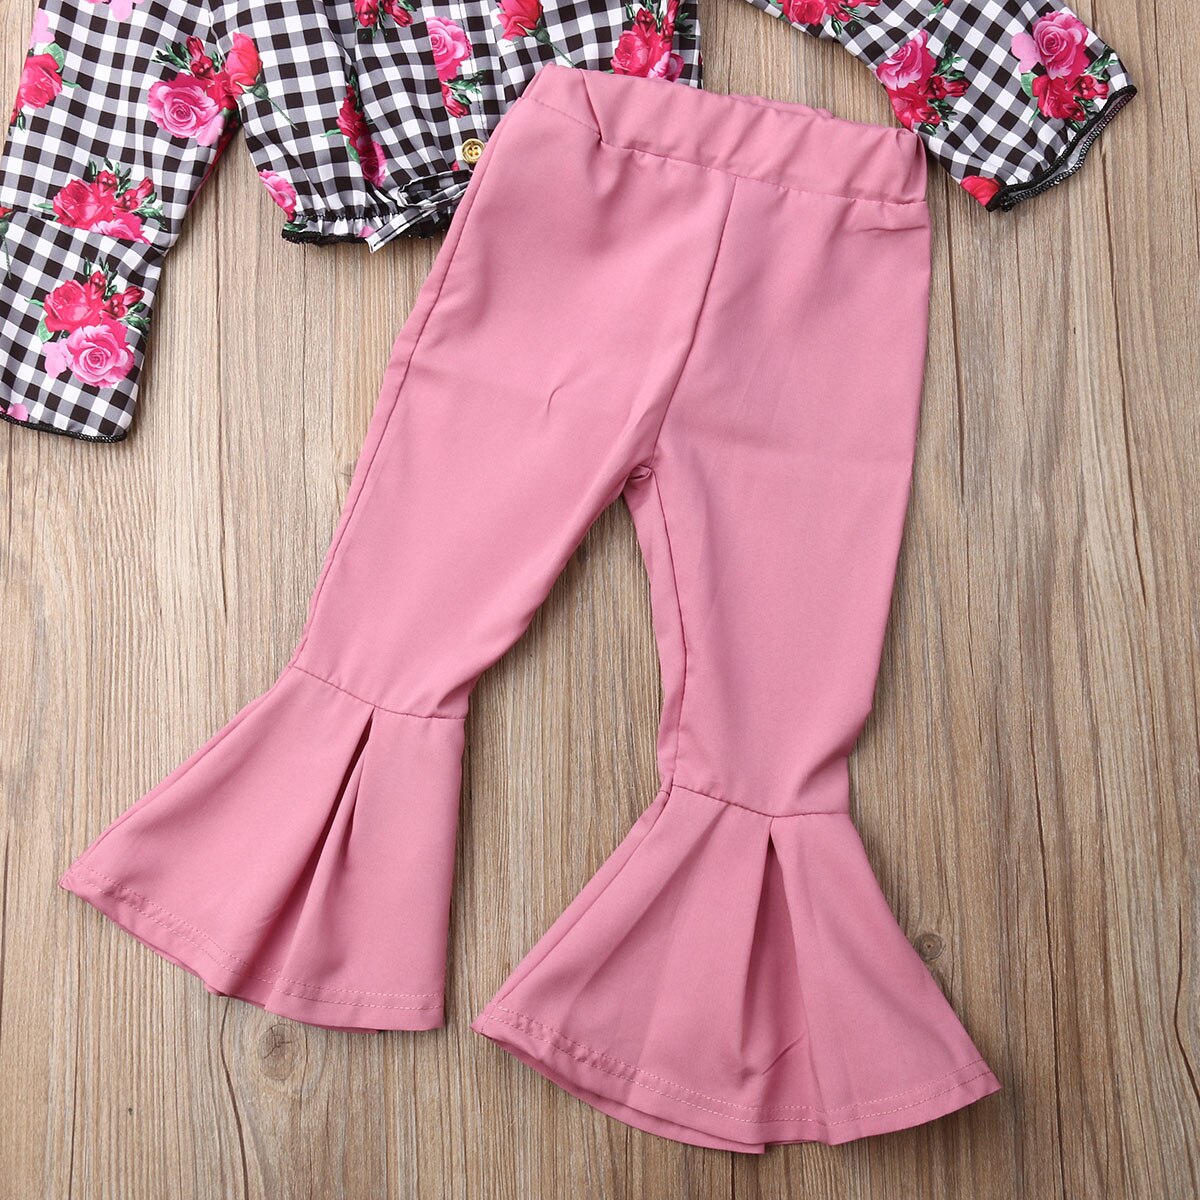 Girls' Clothing, Small And Medium-Sized Children's Checked Long-Sleeved Flared Pants